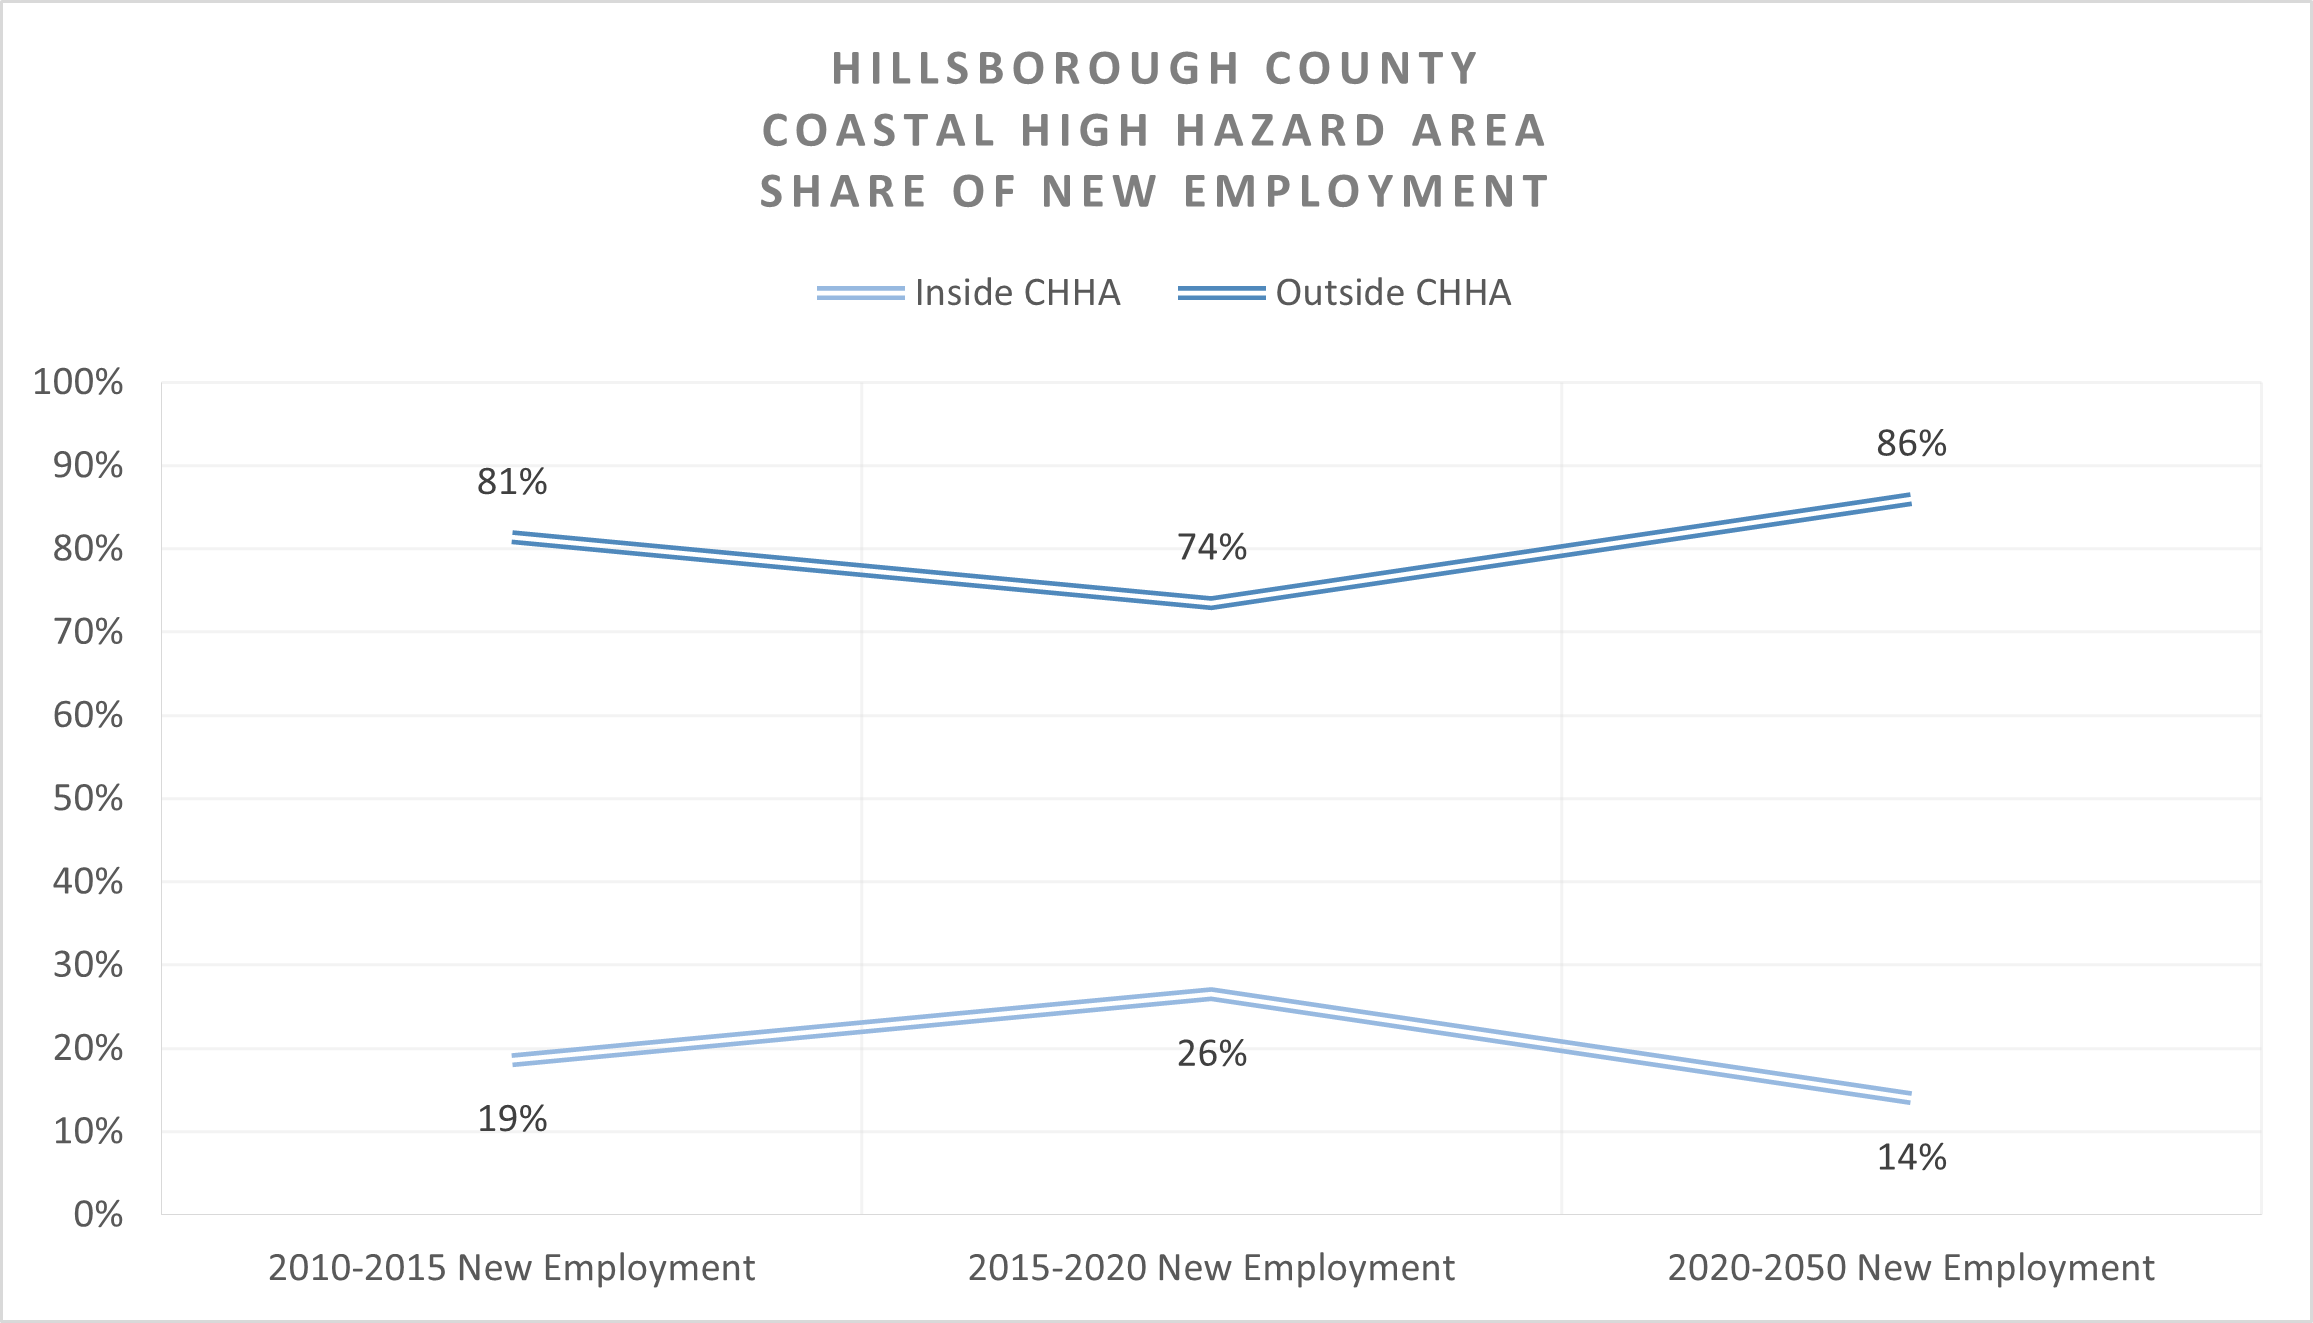 This chart shows Hillsborough County's new jobs inside and outside the CHHA. From 2015 to 2020, 26% of the new jobs moved inside the CHHA and 74% of the new jobs moved outside CHHA. From 2020 to 2050, the share of new jobs inside CHHA is expected to decrease. Namely, 14% of the new jobs are expected to move inside the CHHA and 86% of the new jobs are expected to move outside CHHA.